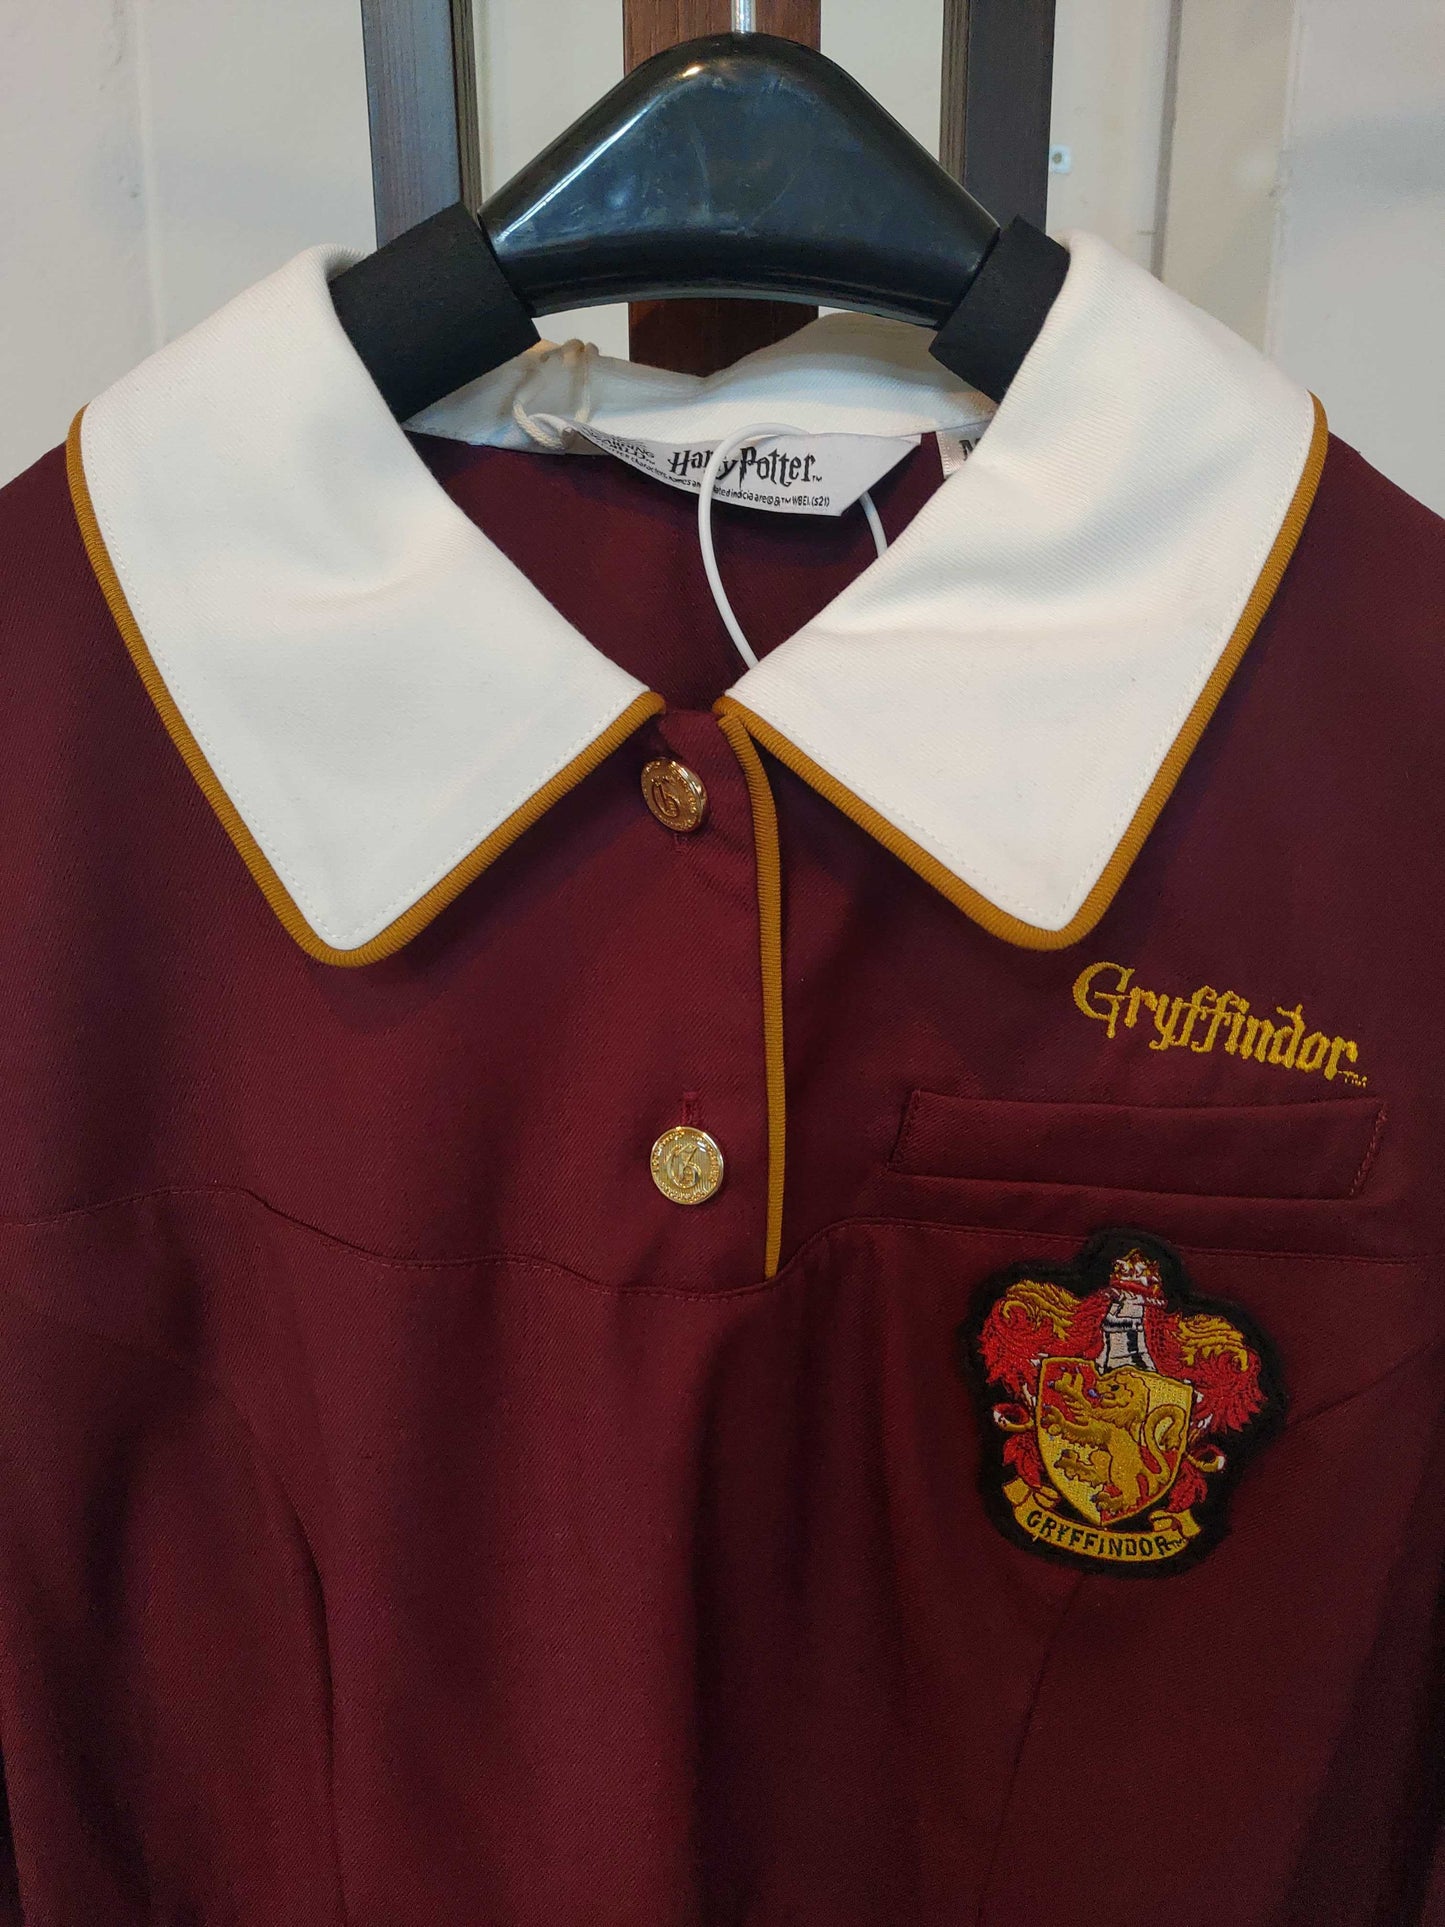 Hogwarts School of Witchcraft and Wizardry Cleric Color Dress